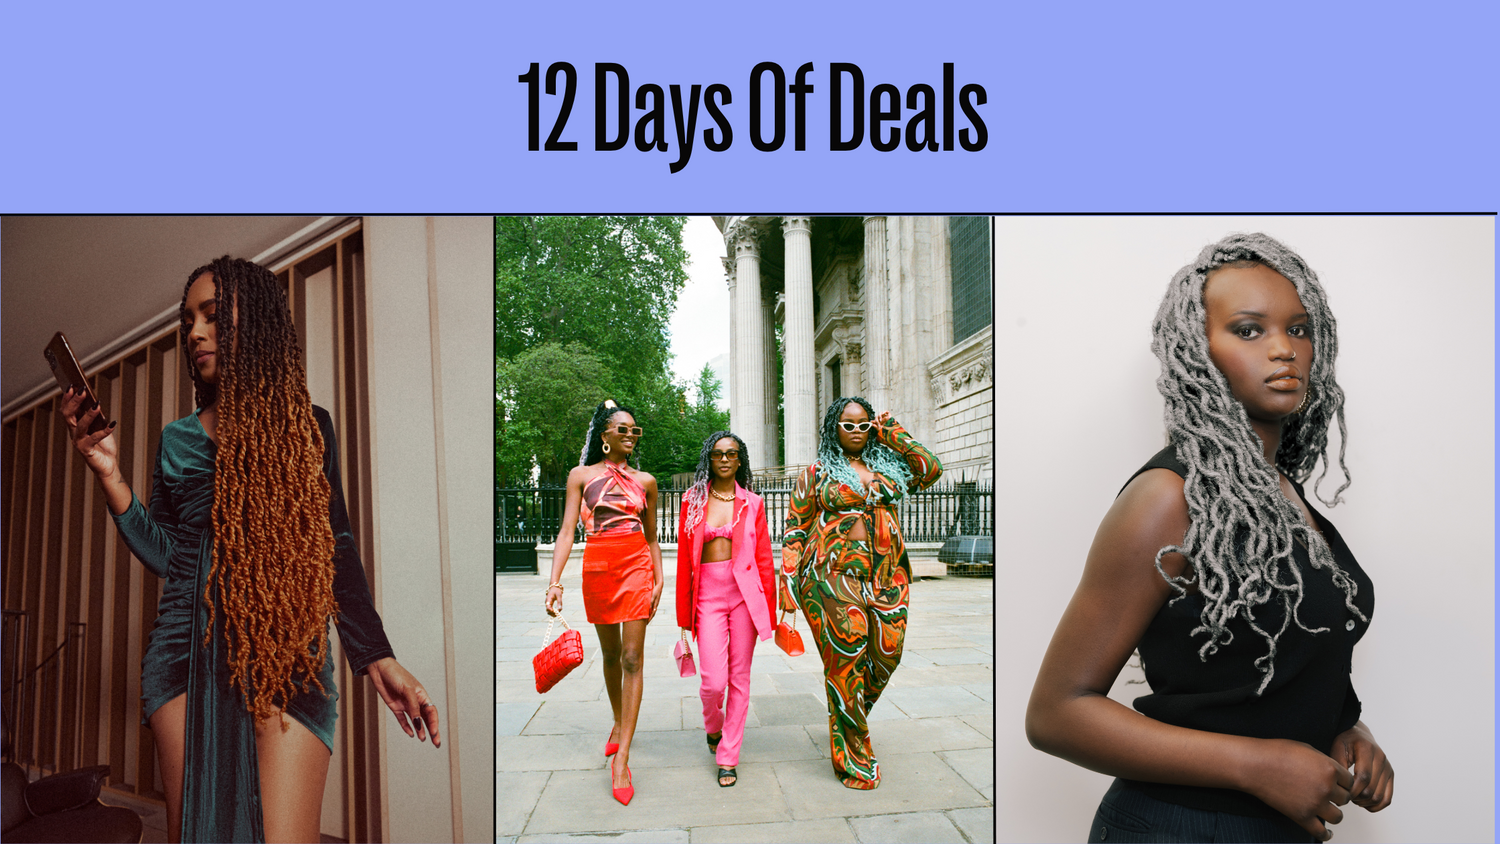 The Countdown Begins: 12 Days of Deals!